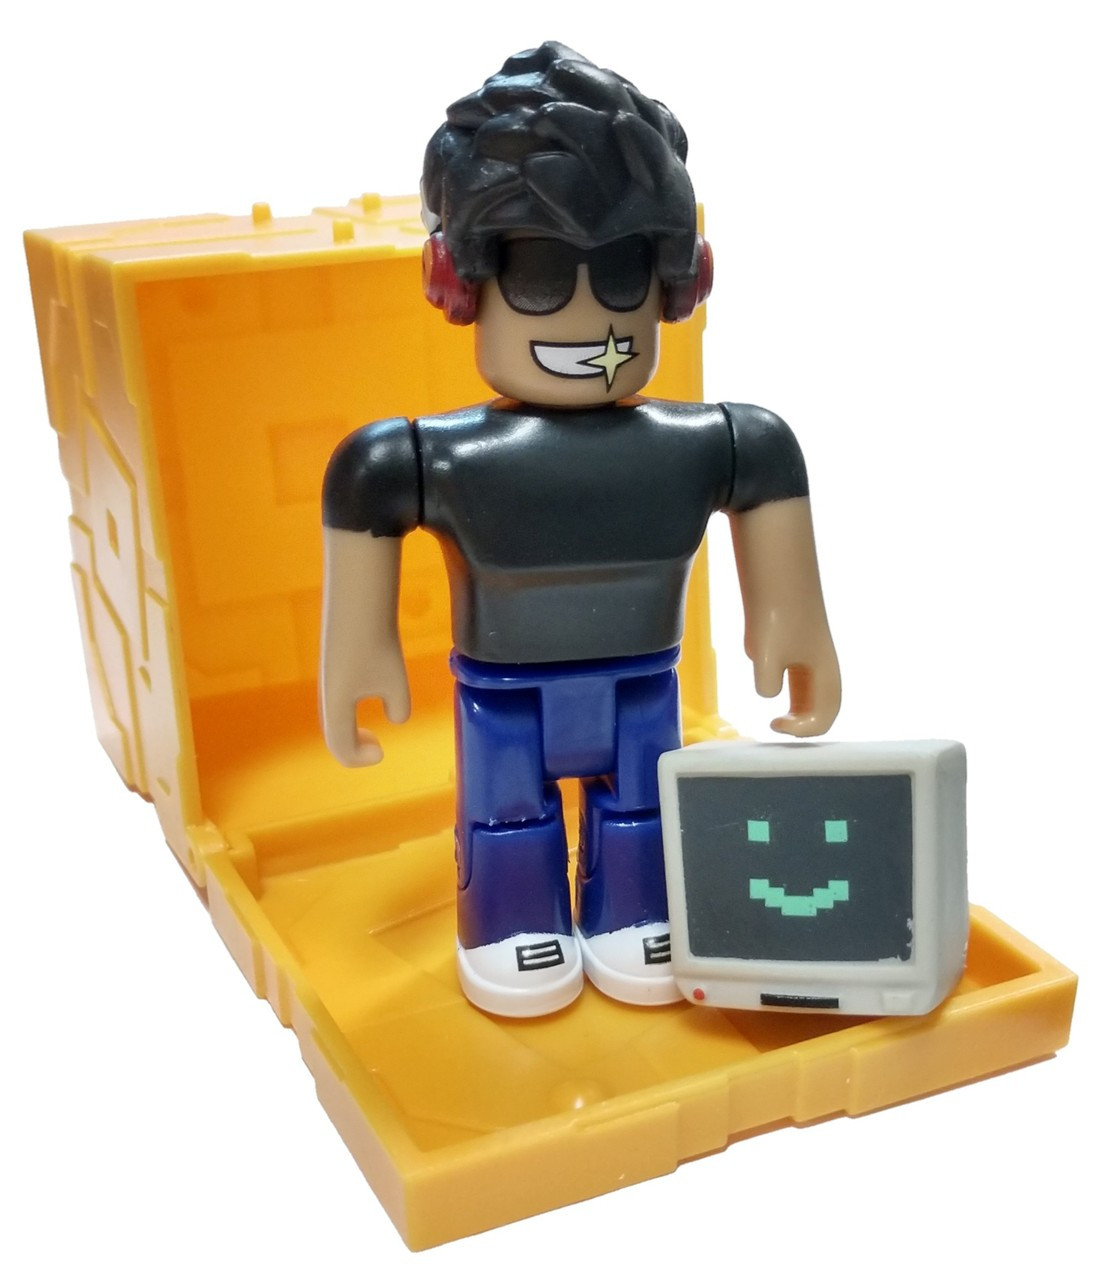 Roblox Series 5 Simbuilder 3 Mini Figure With Gold Cube And Online Code Loose Jazwares Toywiz - roblox toy simulator codes sbux investing com